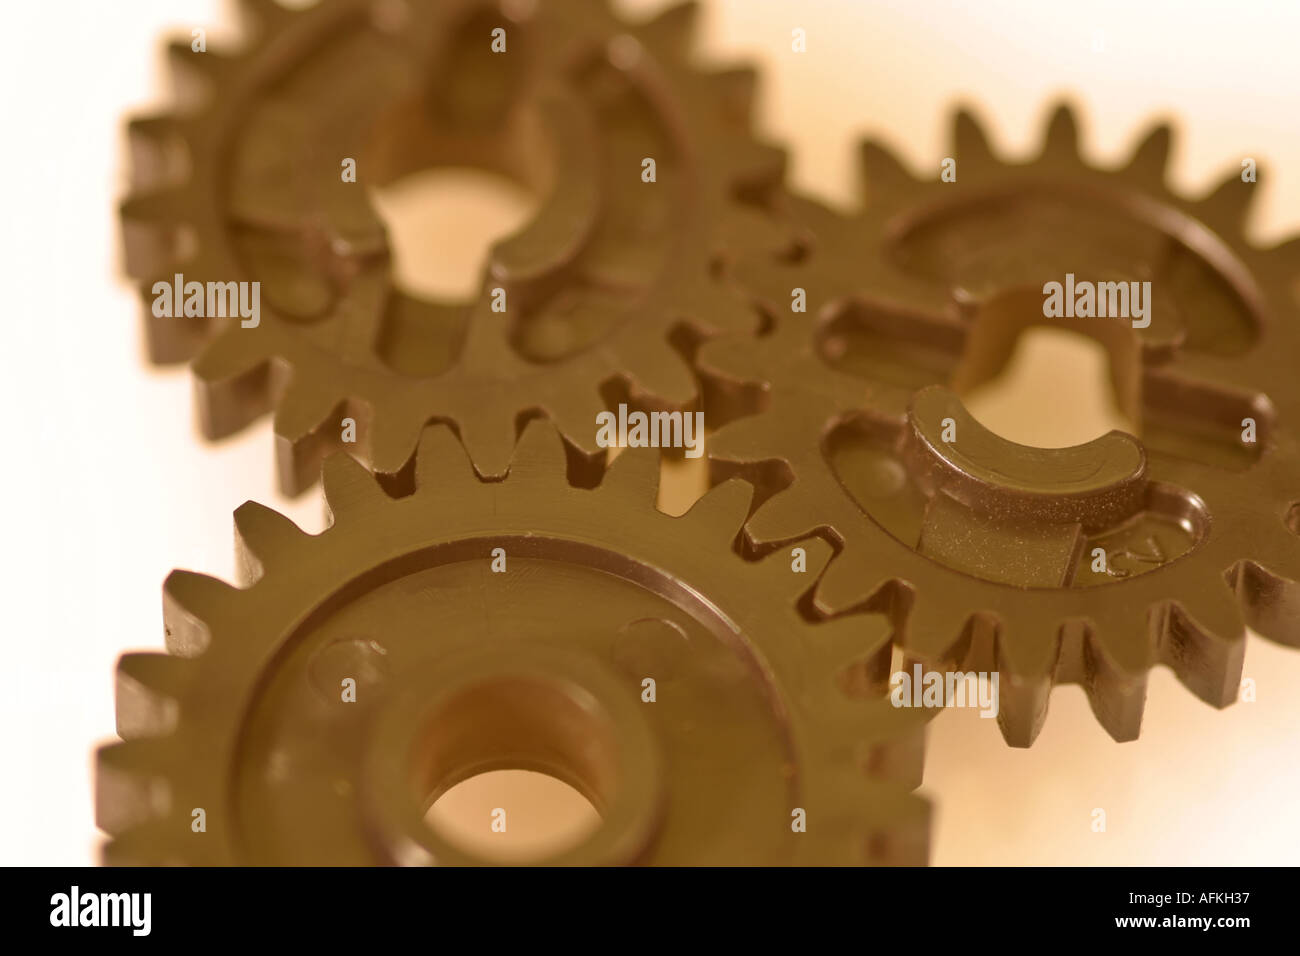 3 gears or cogs Stock Photo